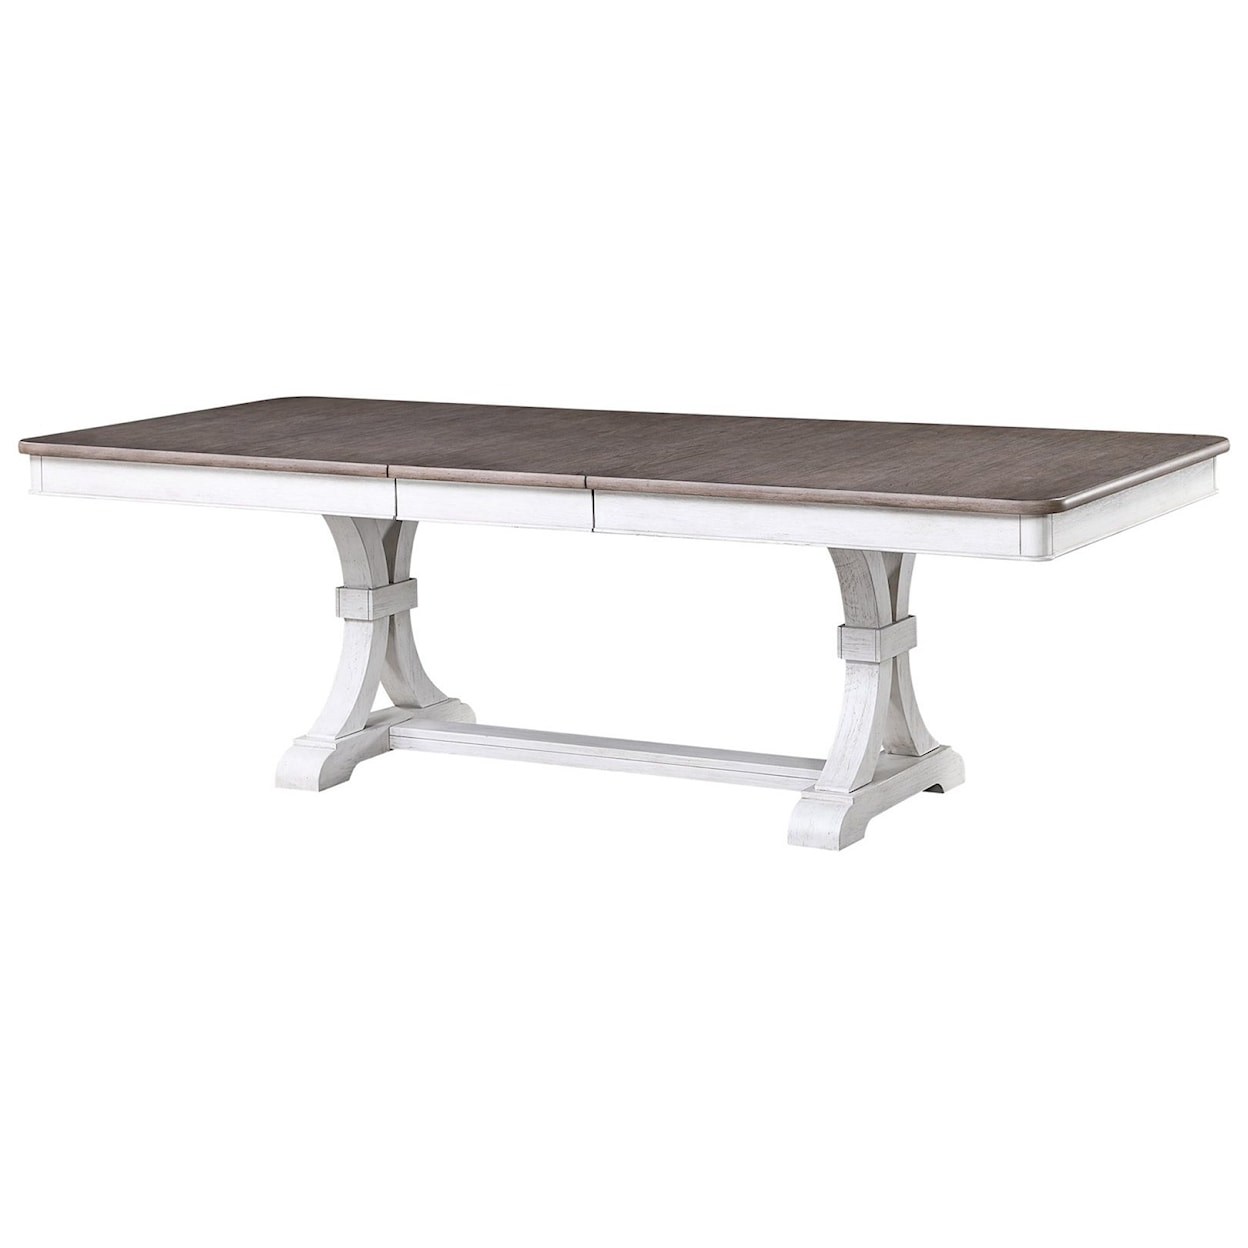 Panama Jack by Palmetto Home Sonoma Dining Table